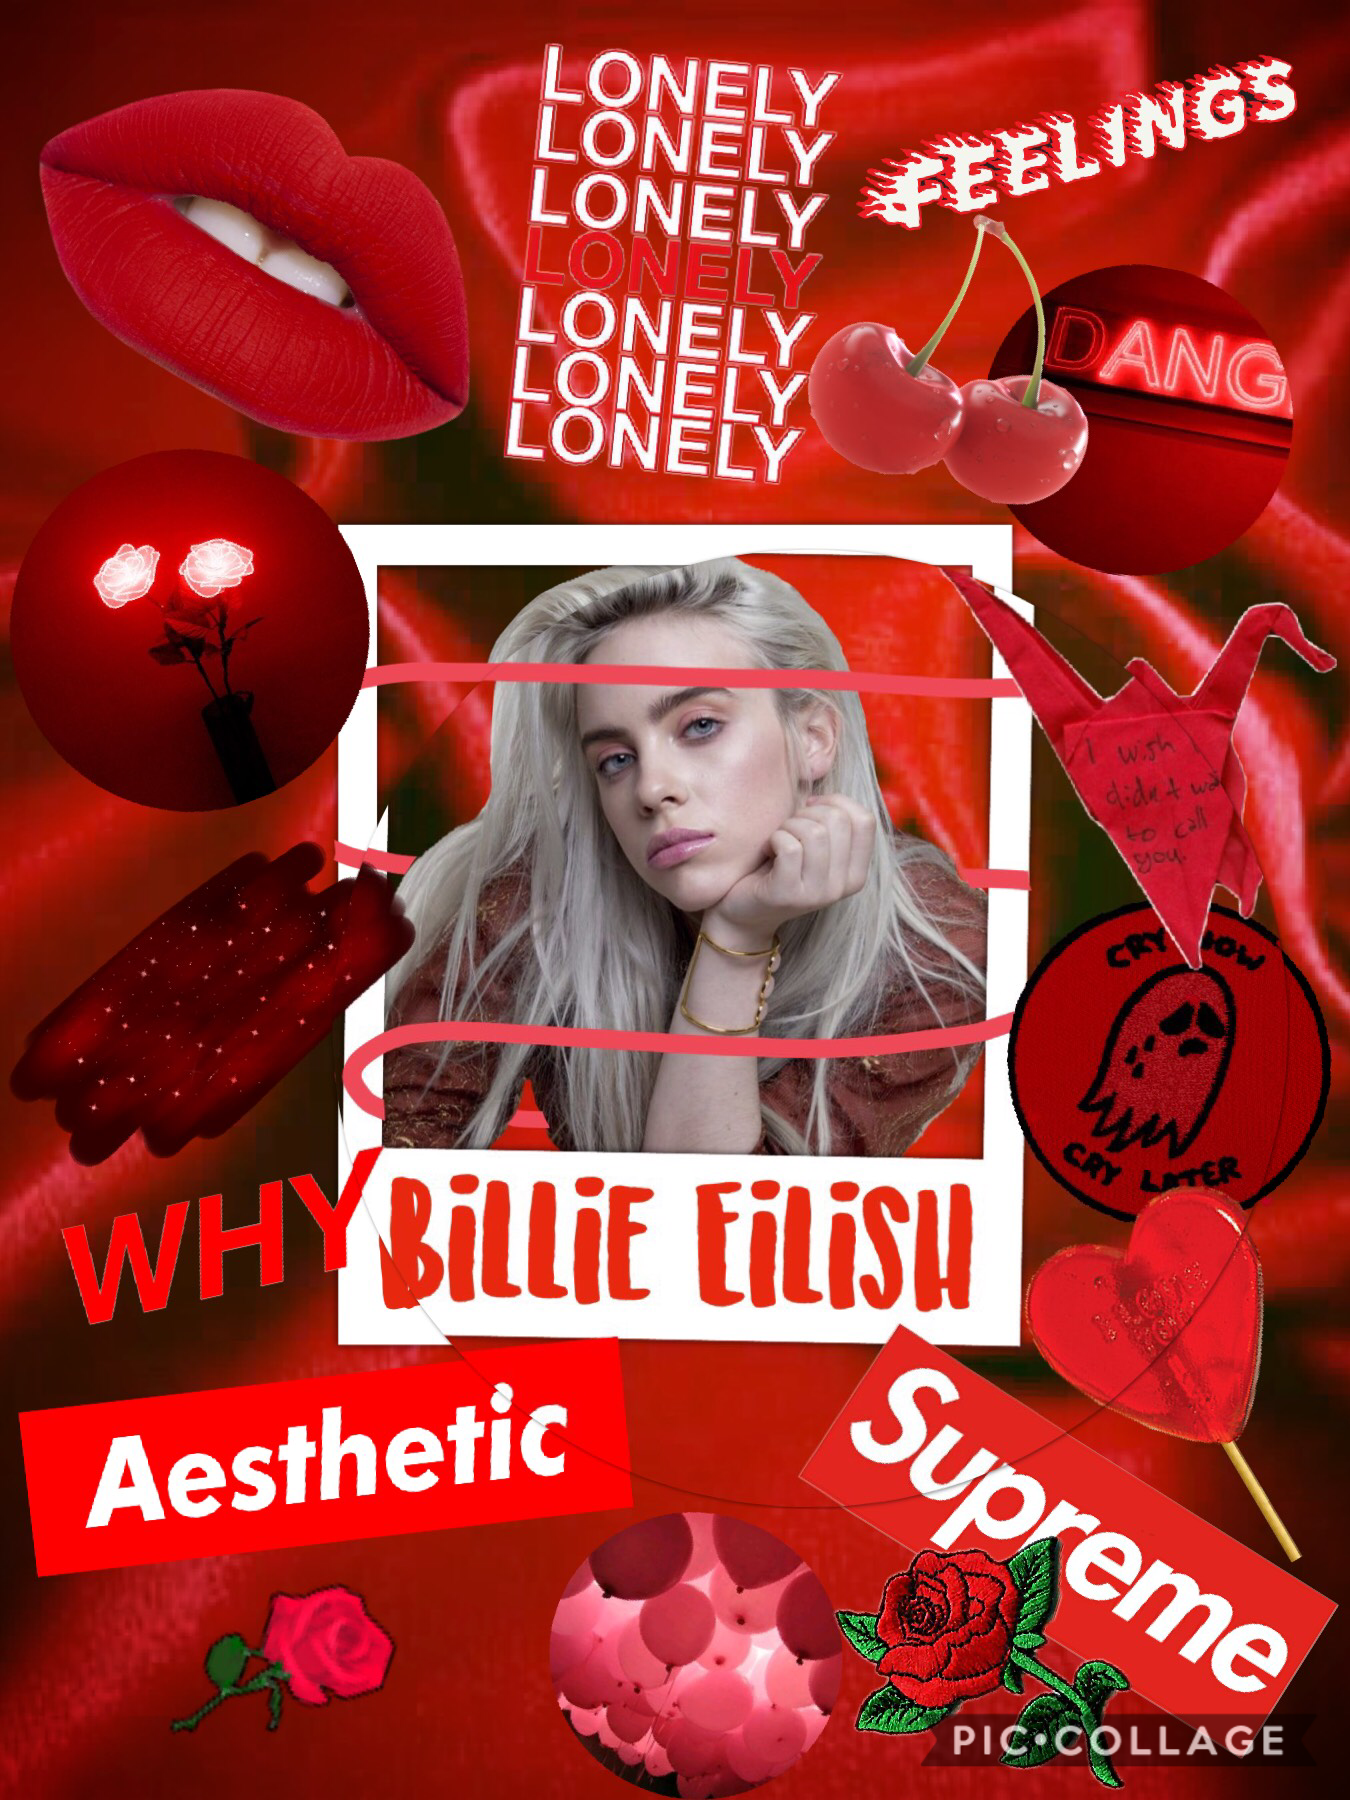 ♦️❤️Tap Here❤️♦️
Billie Eilish Red Aesthetic! If you vote for this collage, comment on here, and if you vote for @Chloeaud27 collage, comment on hers! Thx guys!